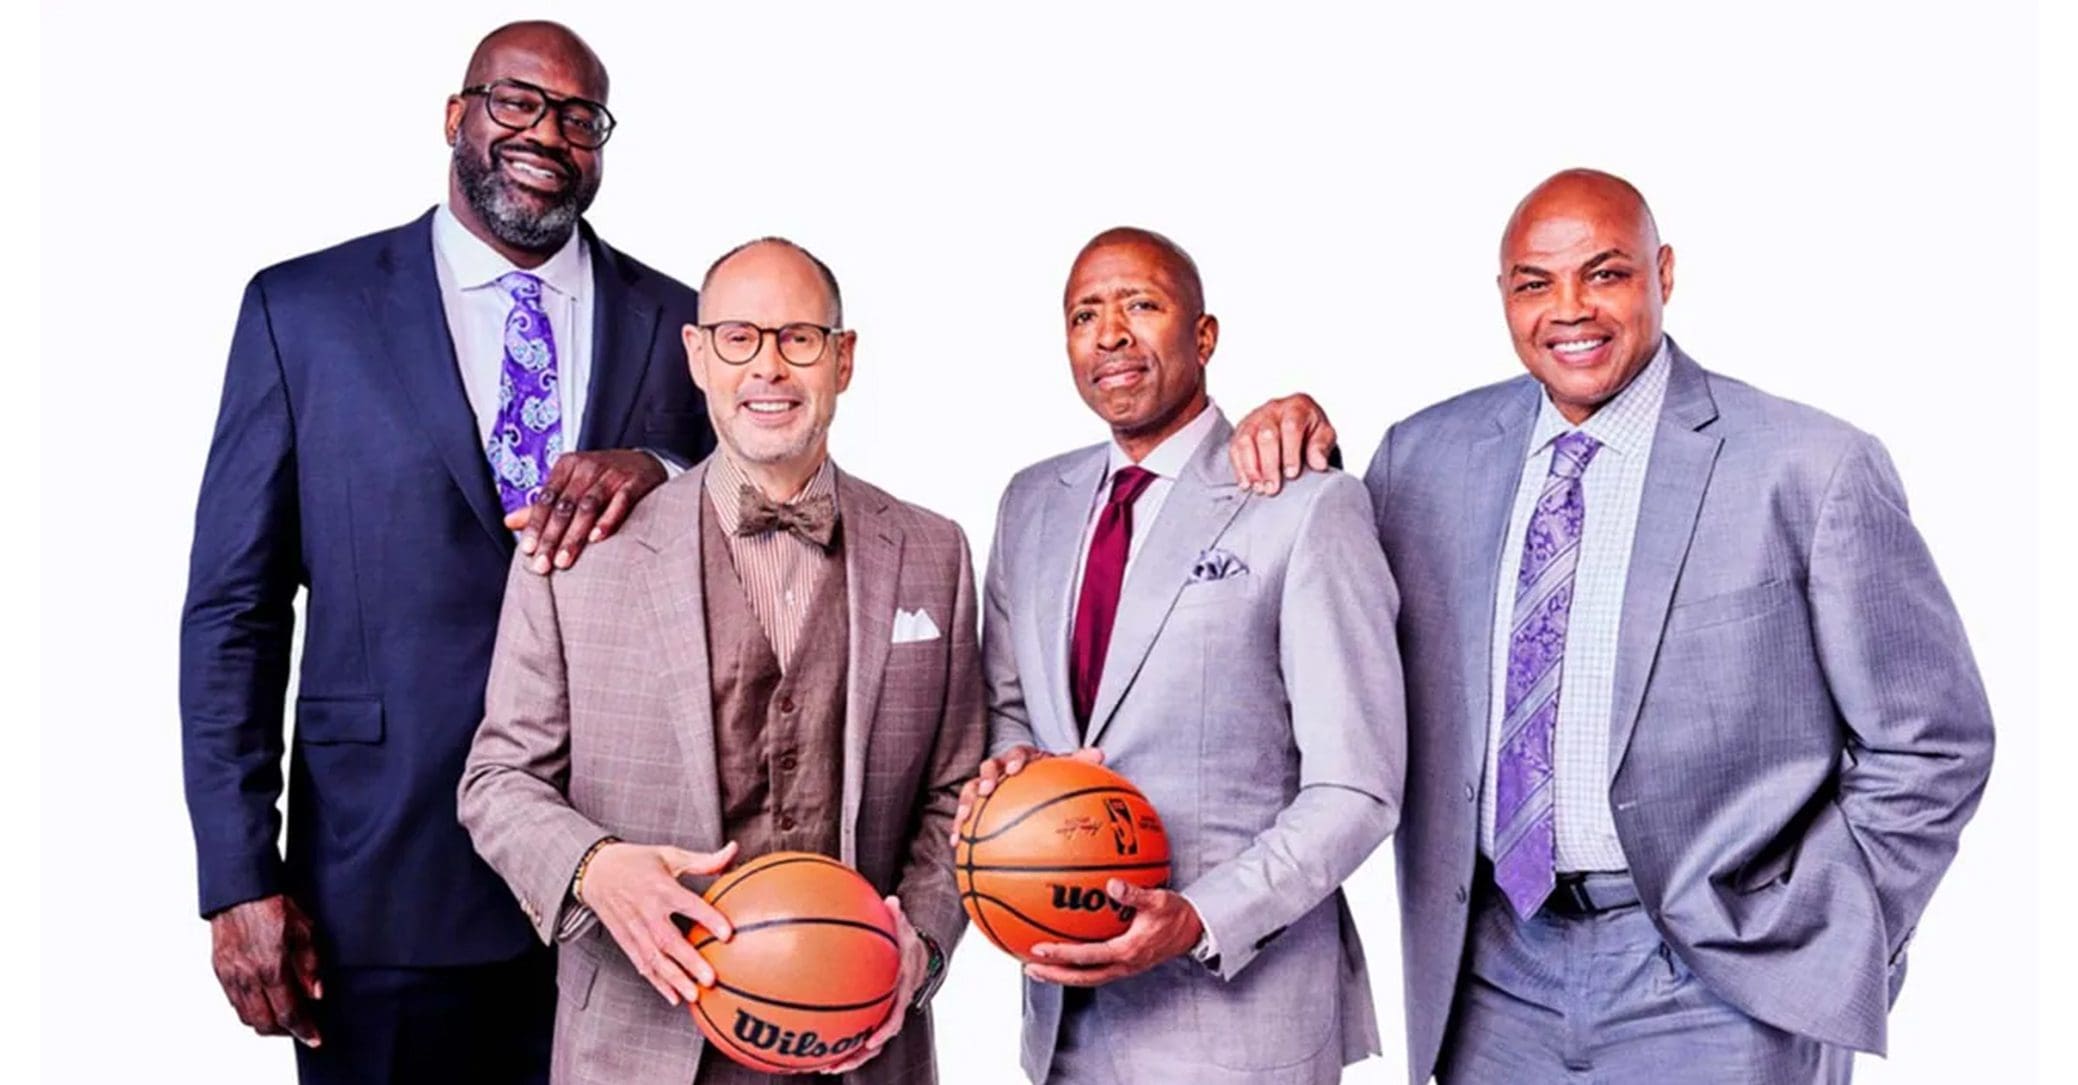 Report: TNT Outbid by NBC for Broadcast Rights to the NBA, “Inside the NBA” is in its Final Season